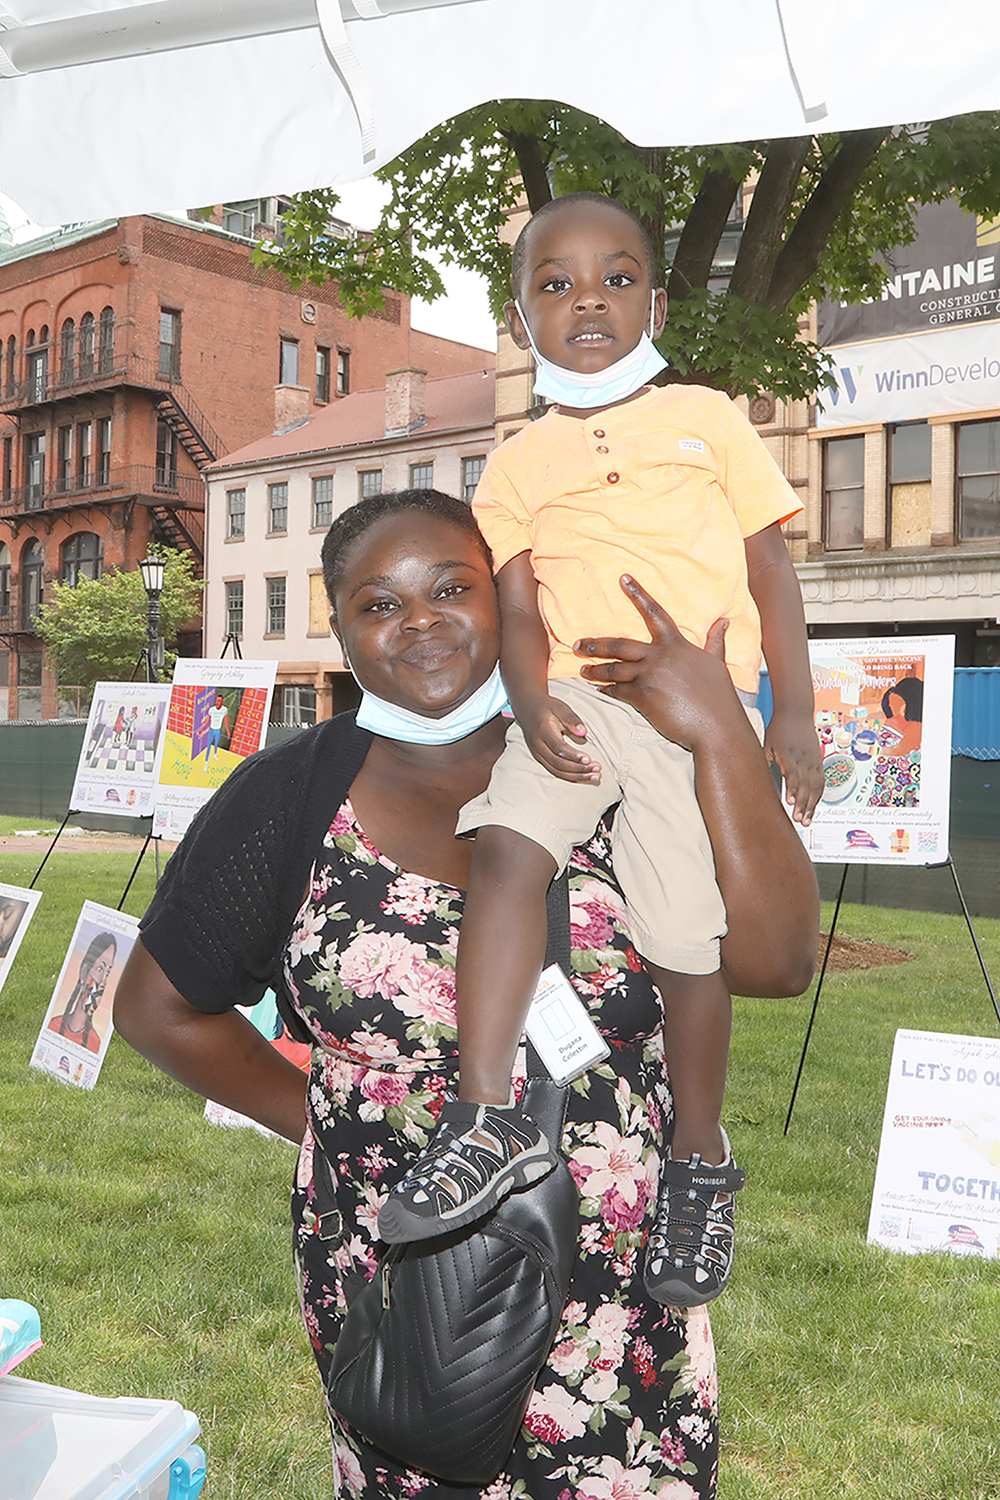 Dugana Celestin with her son Eliot at Chalk for Change 2022 taking place at Court Square in Springfield on July 16th. (Ed Cohen Photo)